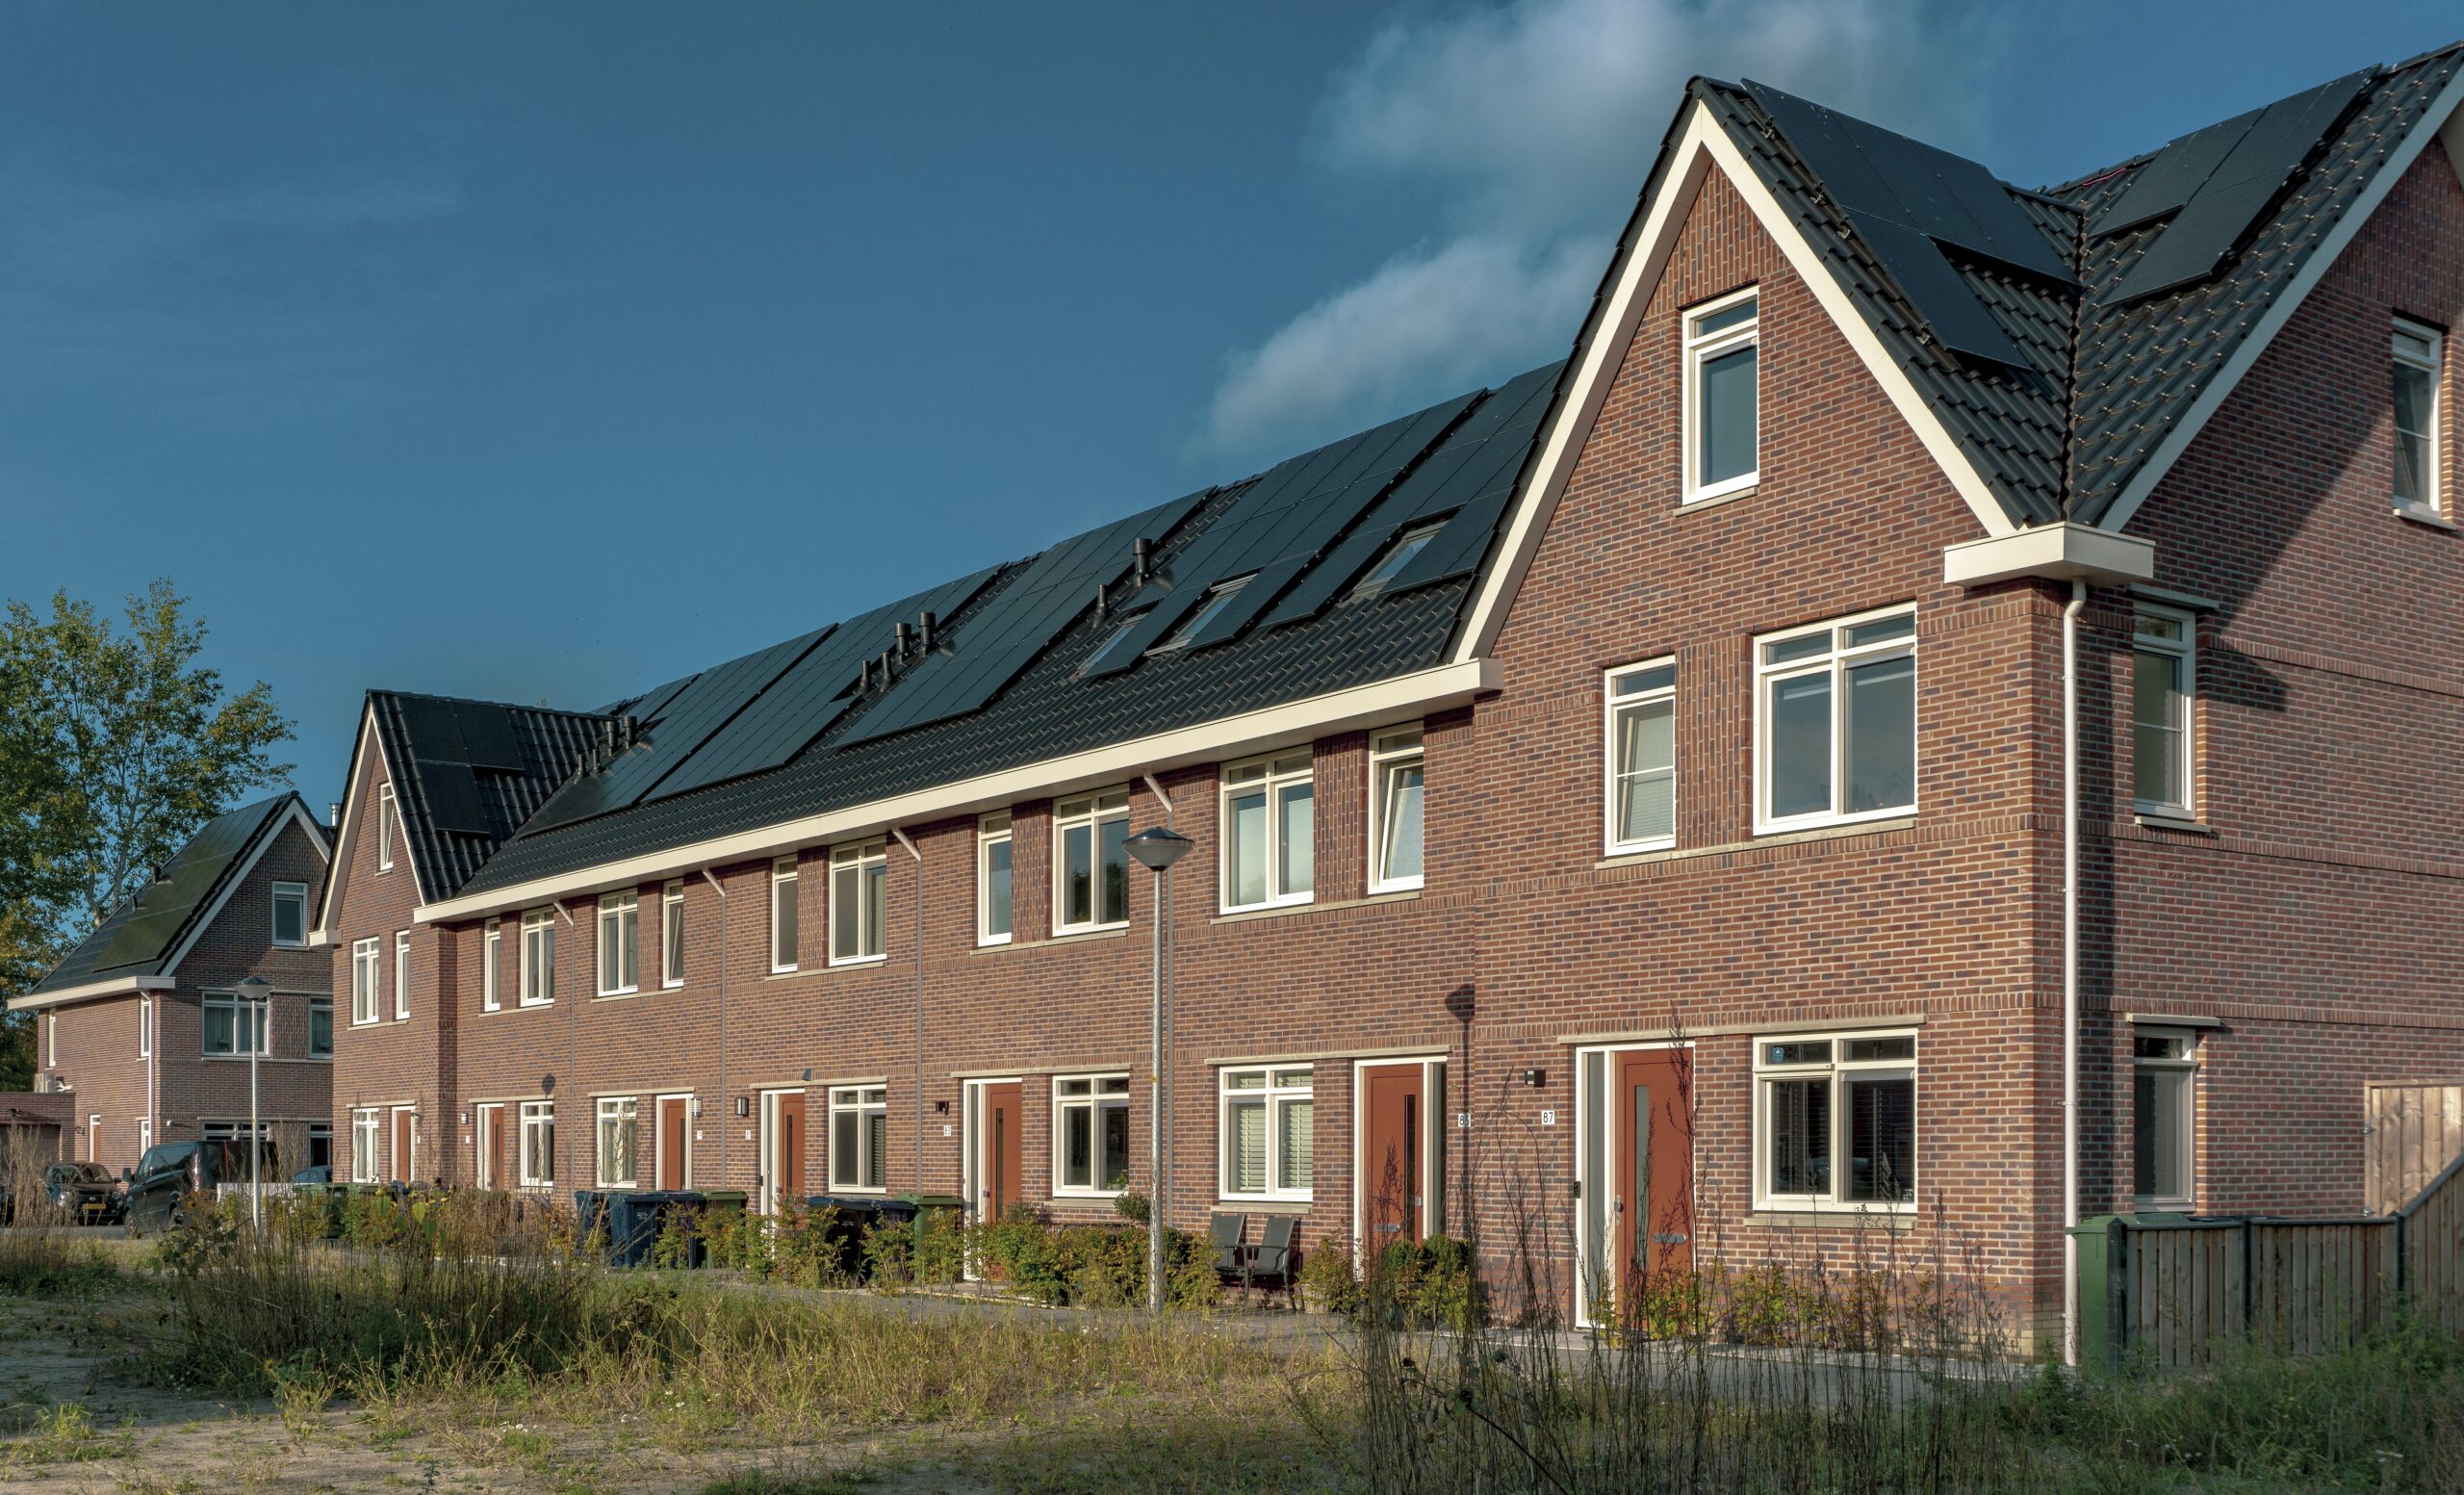 Solar PV on a row of homes